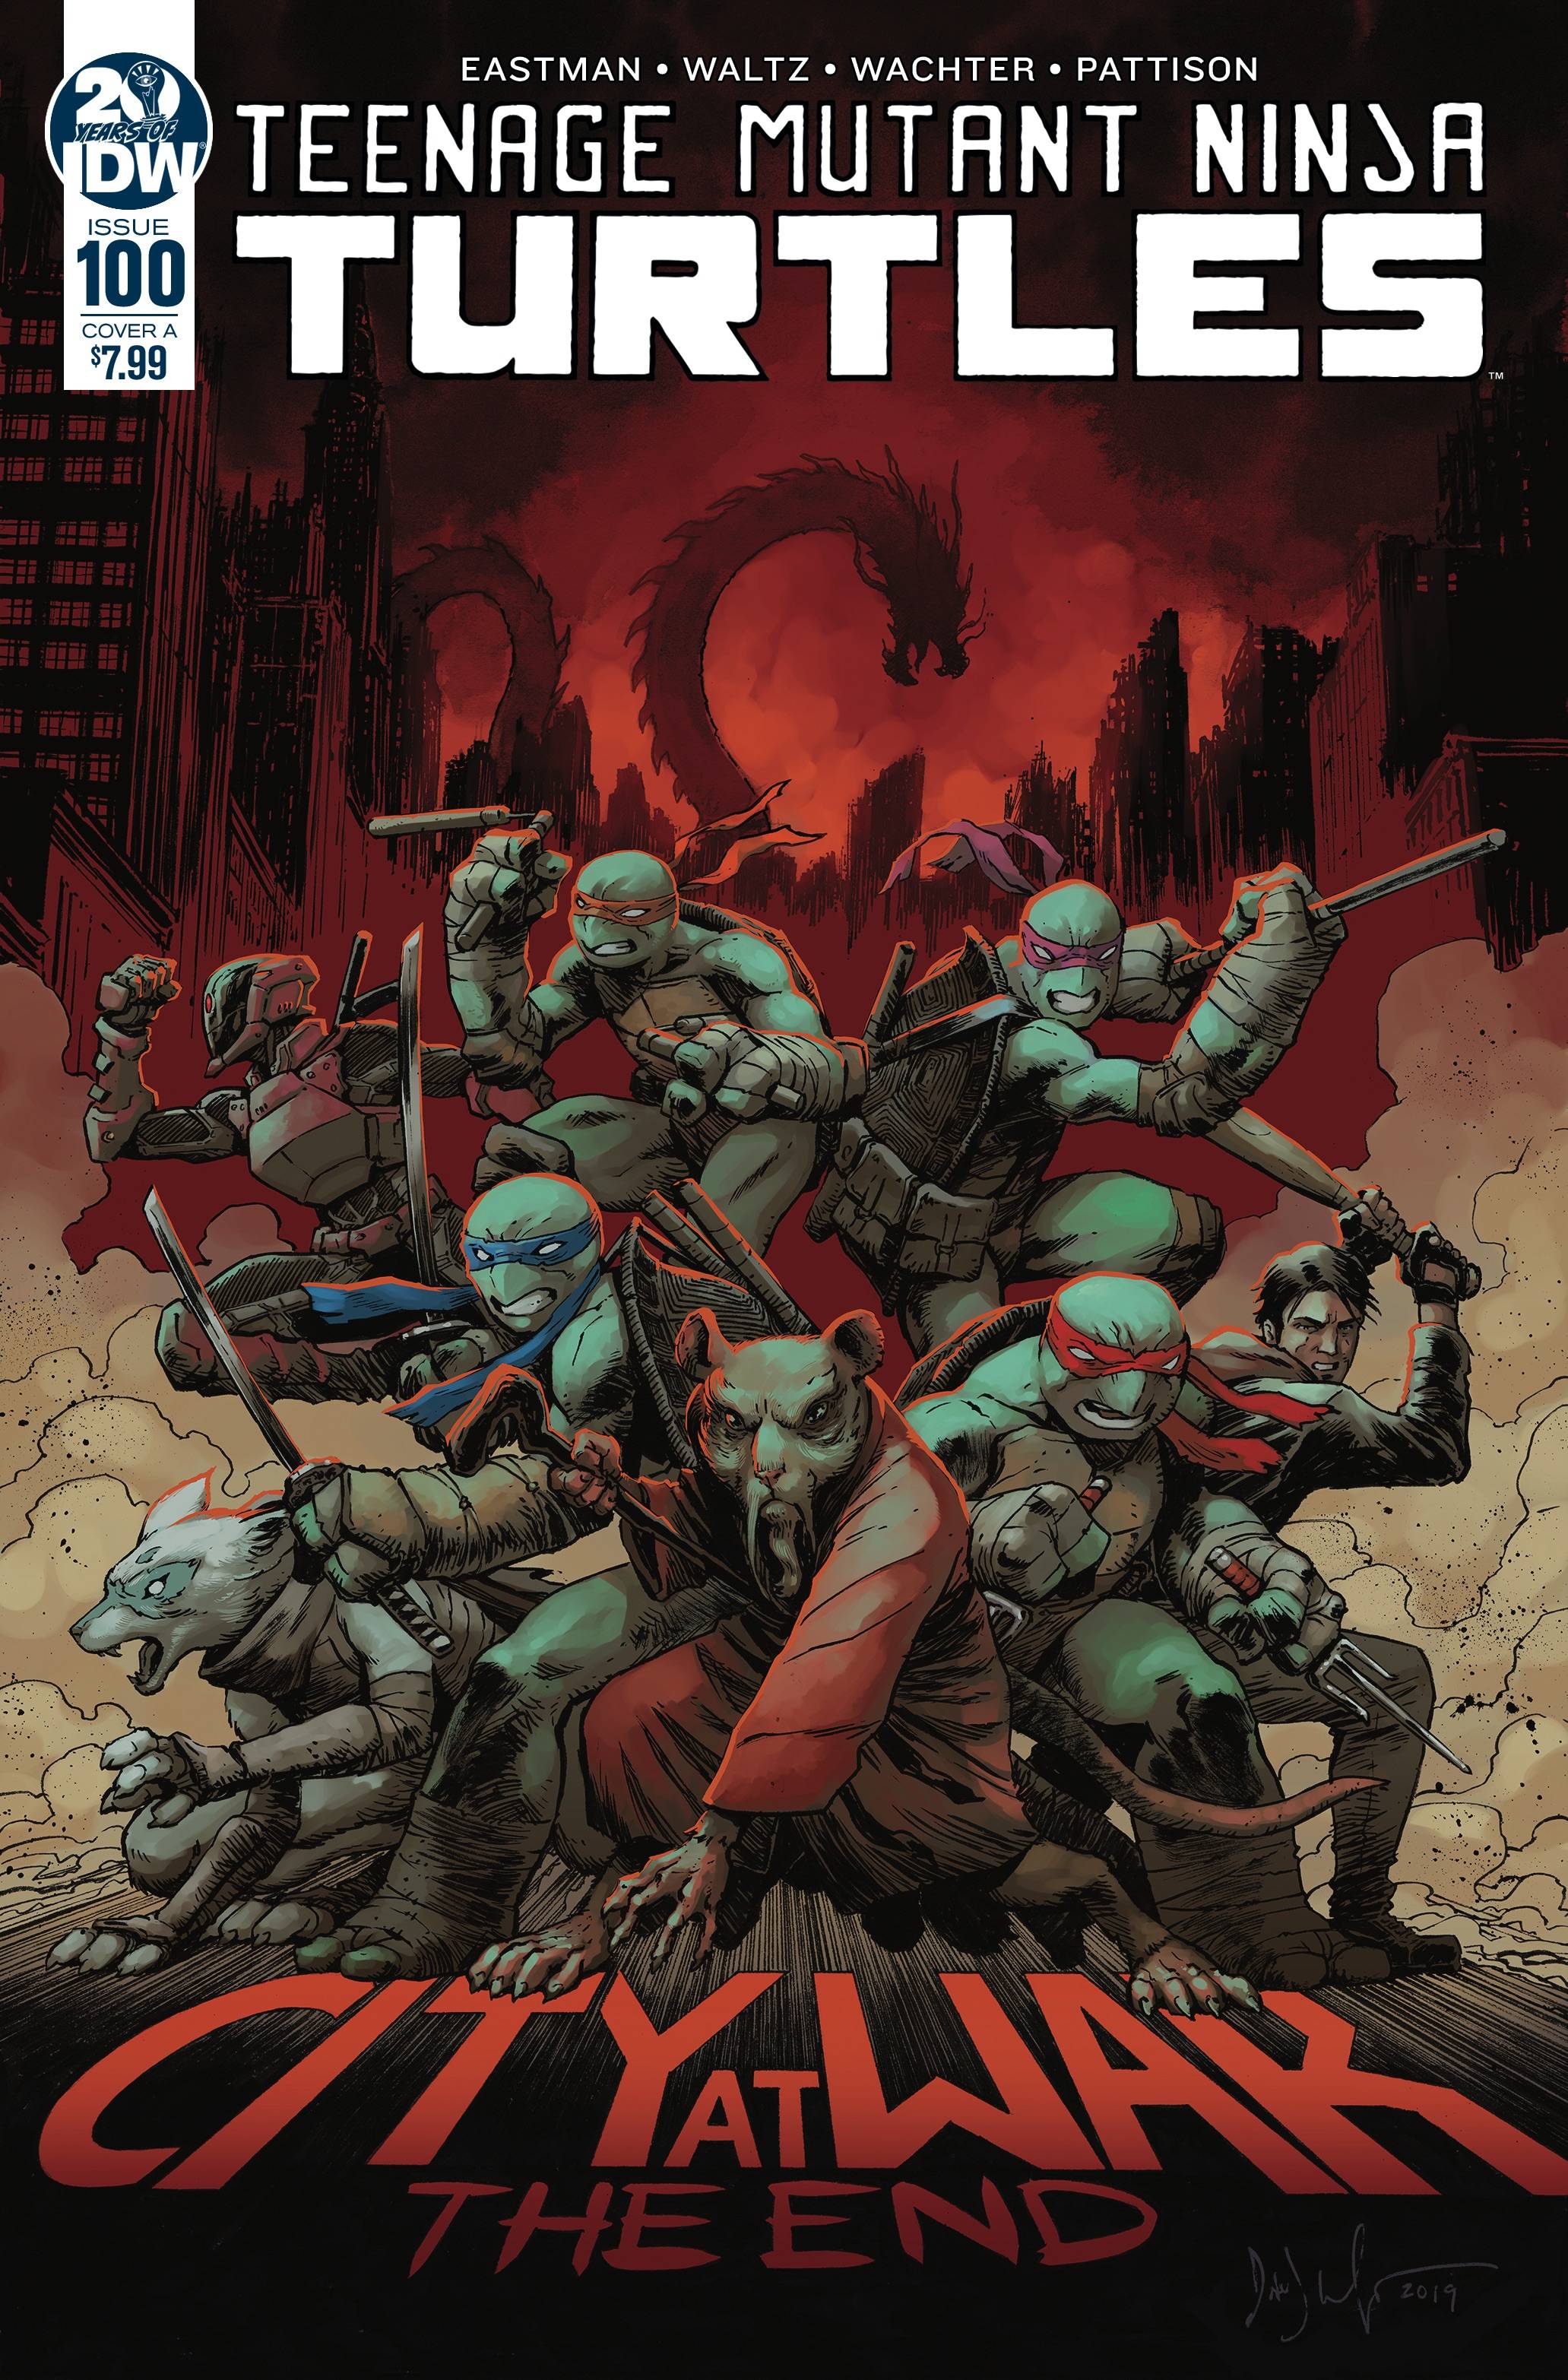 Teenage Mutant Ninja Turtles Ongoing #100 Cover A Wachter (2011)